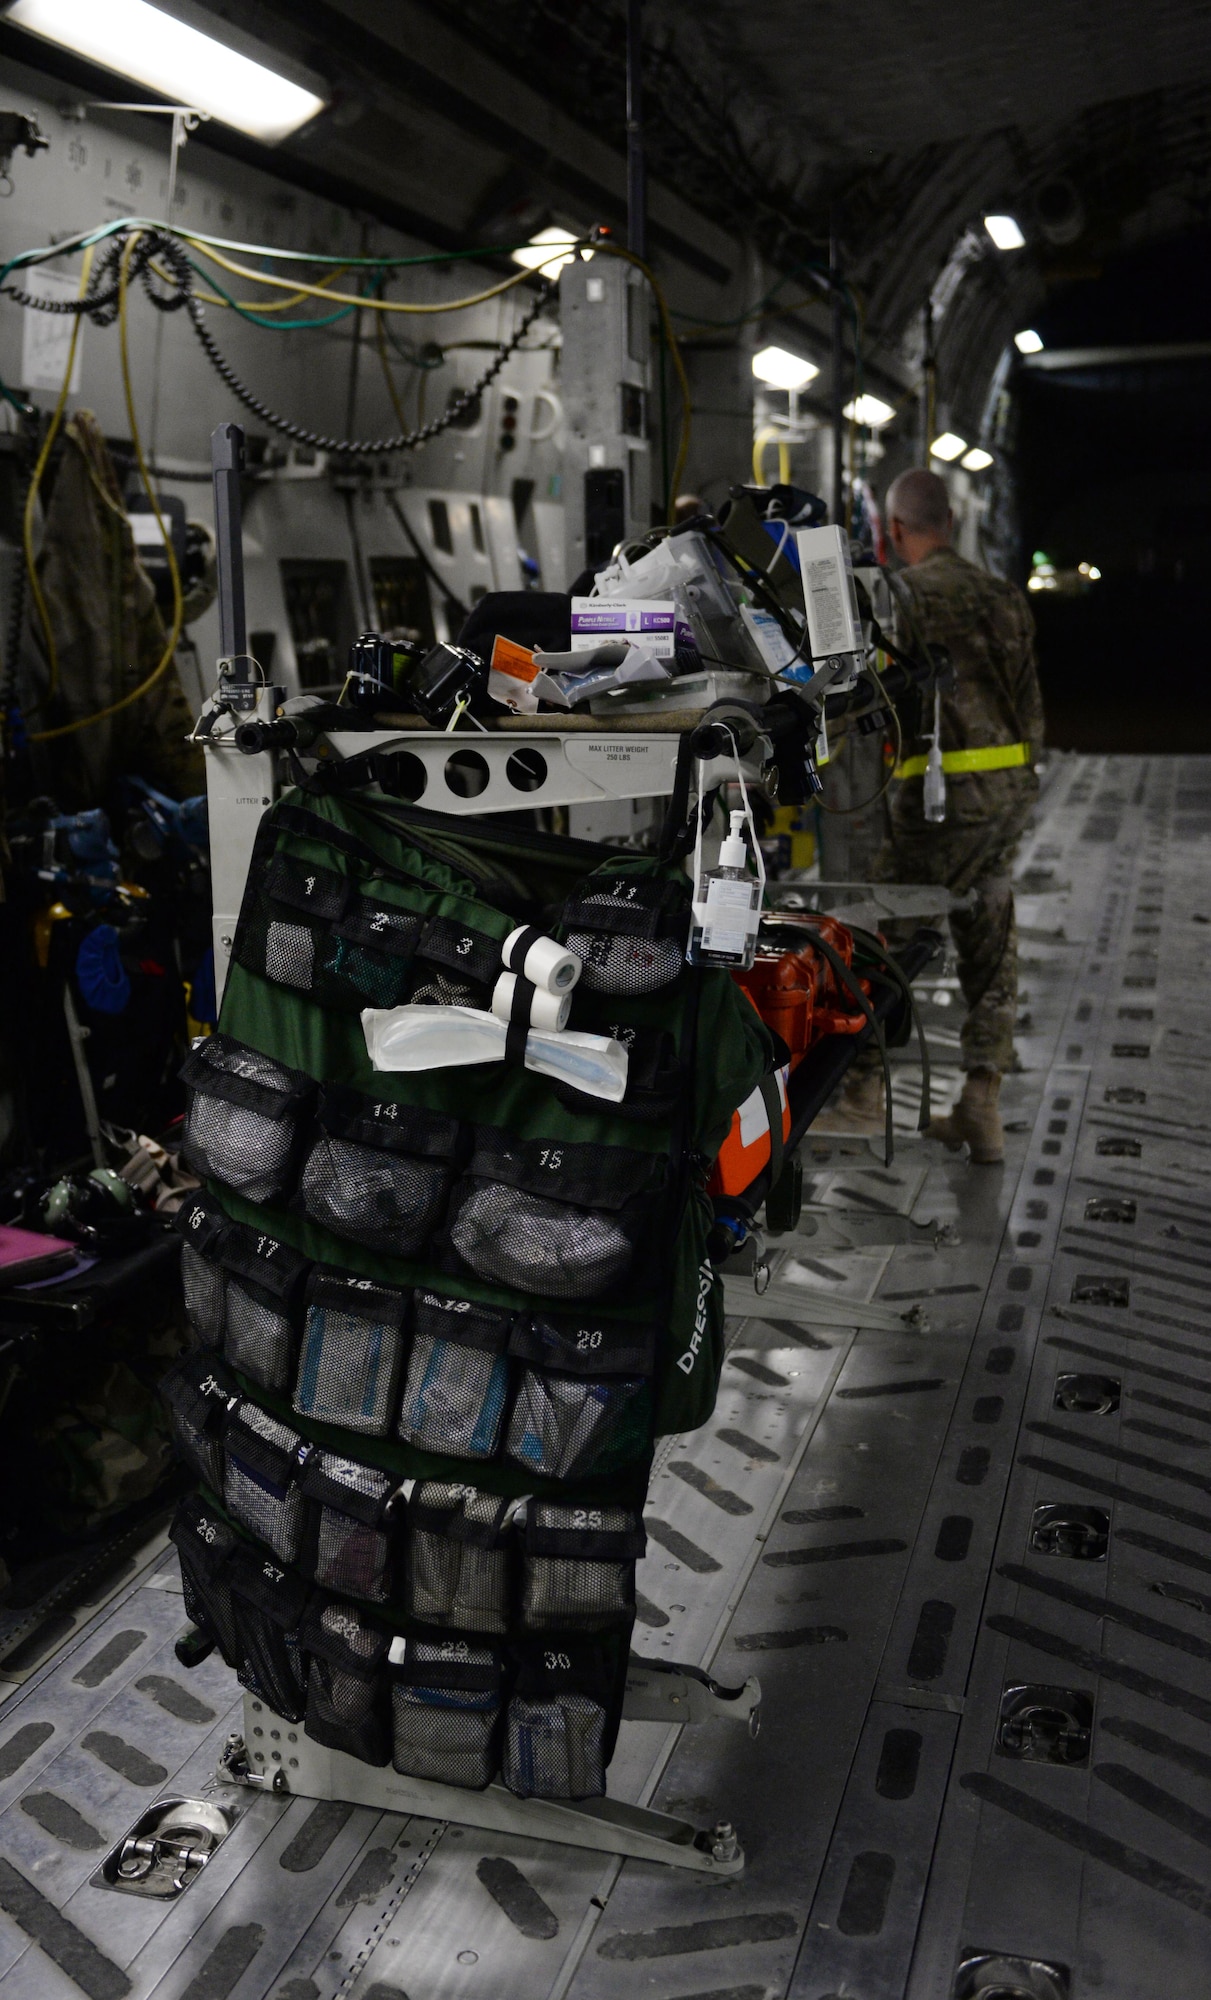 Aeromedical evacuation equipment and supplies are readied by U.S. Airmen assigned to the 455th Expeditionary Aeromedical Evacuation Squadron for an AE mission aboard a C-17 Globemaster III aircraft from Bagram Airfield, Afghanistan, to Ramstein Air Base, Germany, Aug. 8, 2015. The 455th EAES Airmen are charged with the responsibility of evacuating the sick and wounded from Central Command to higher echelons of medical care. (U.S. Air Force photo by Maj. Tony Wickman/Released)  